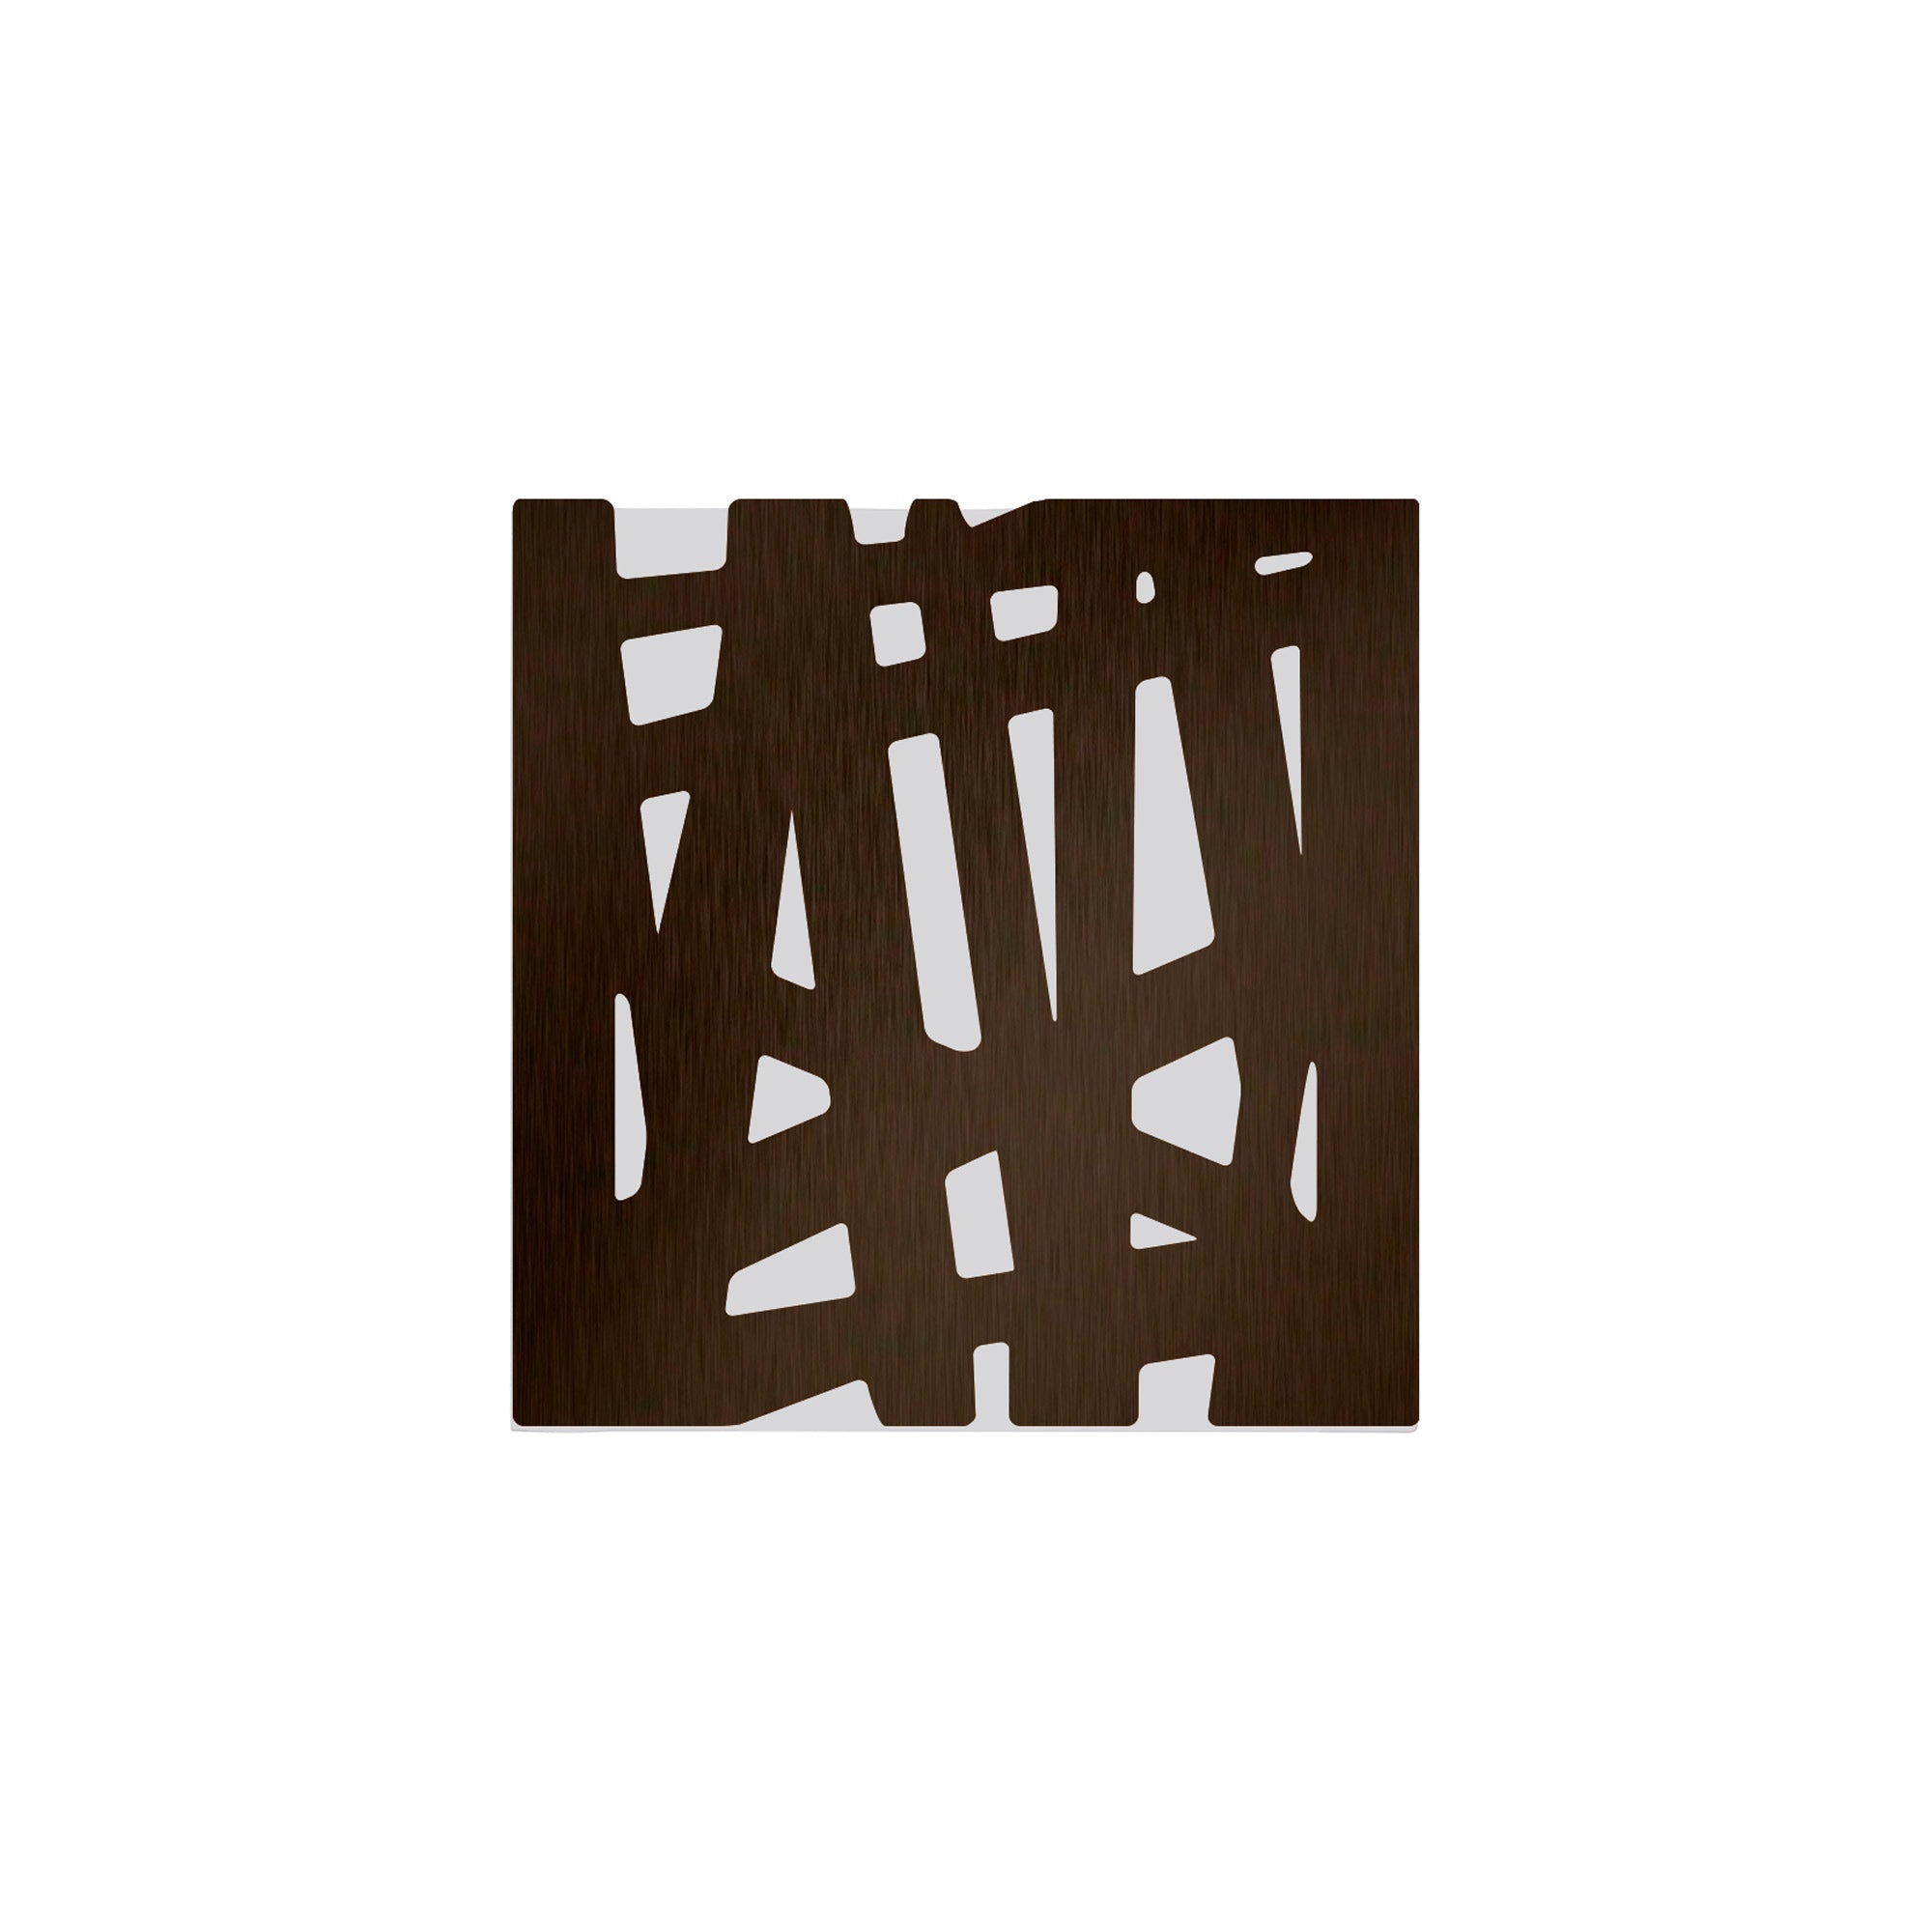 The Zen Wall Sconce from Seascape Fixtures, Sticks style in brown color.